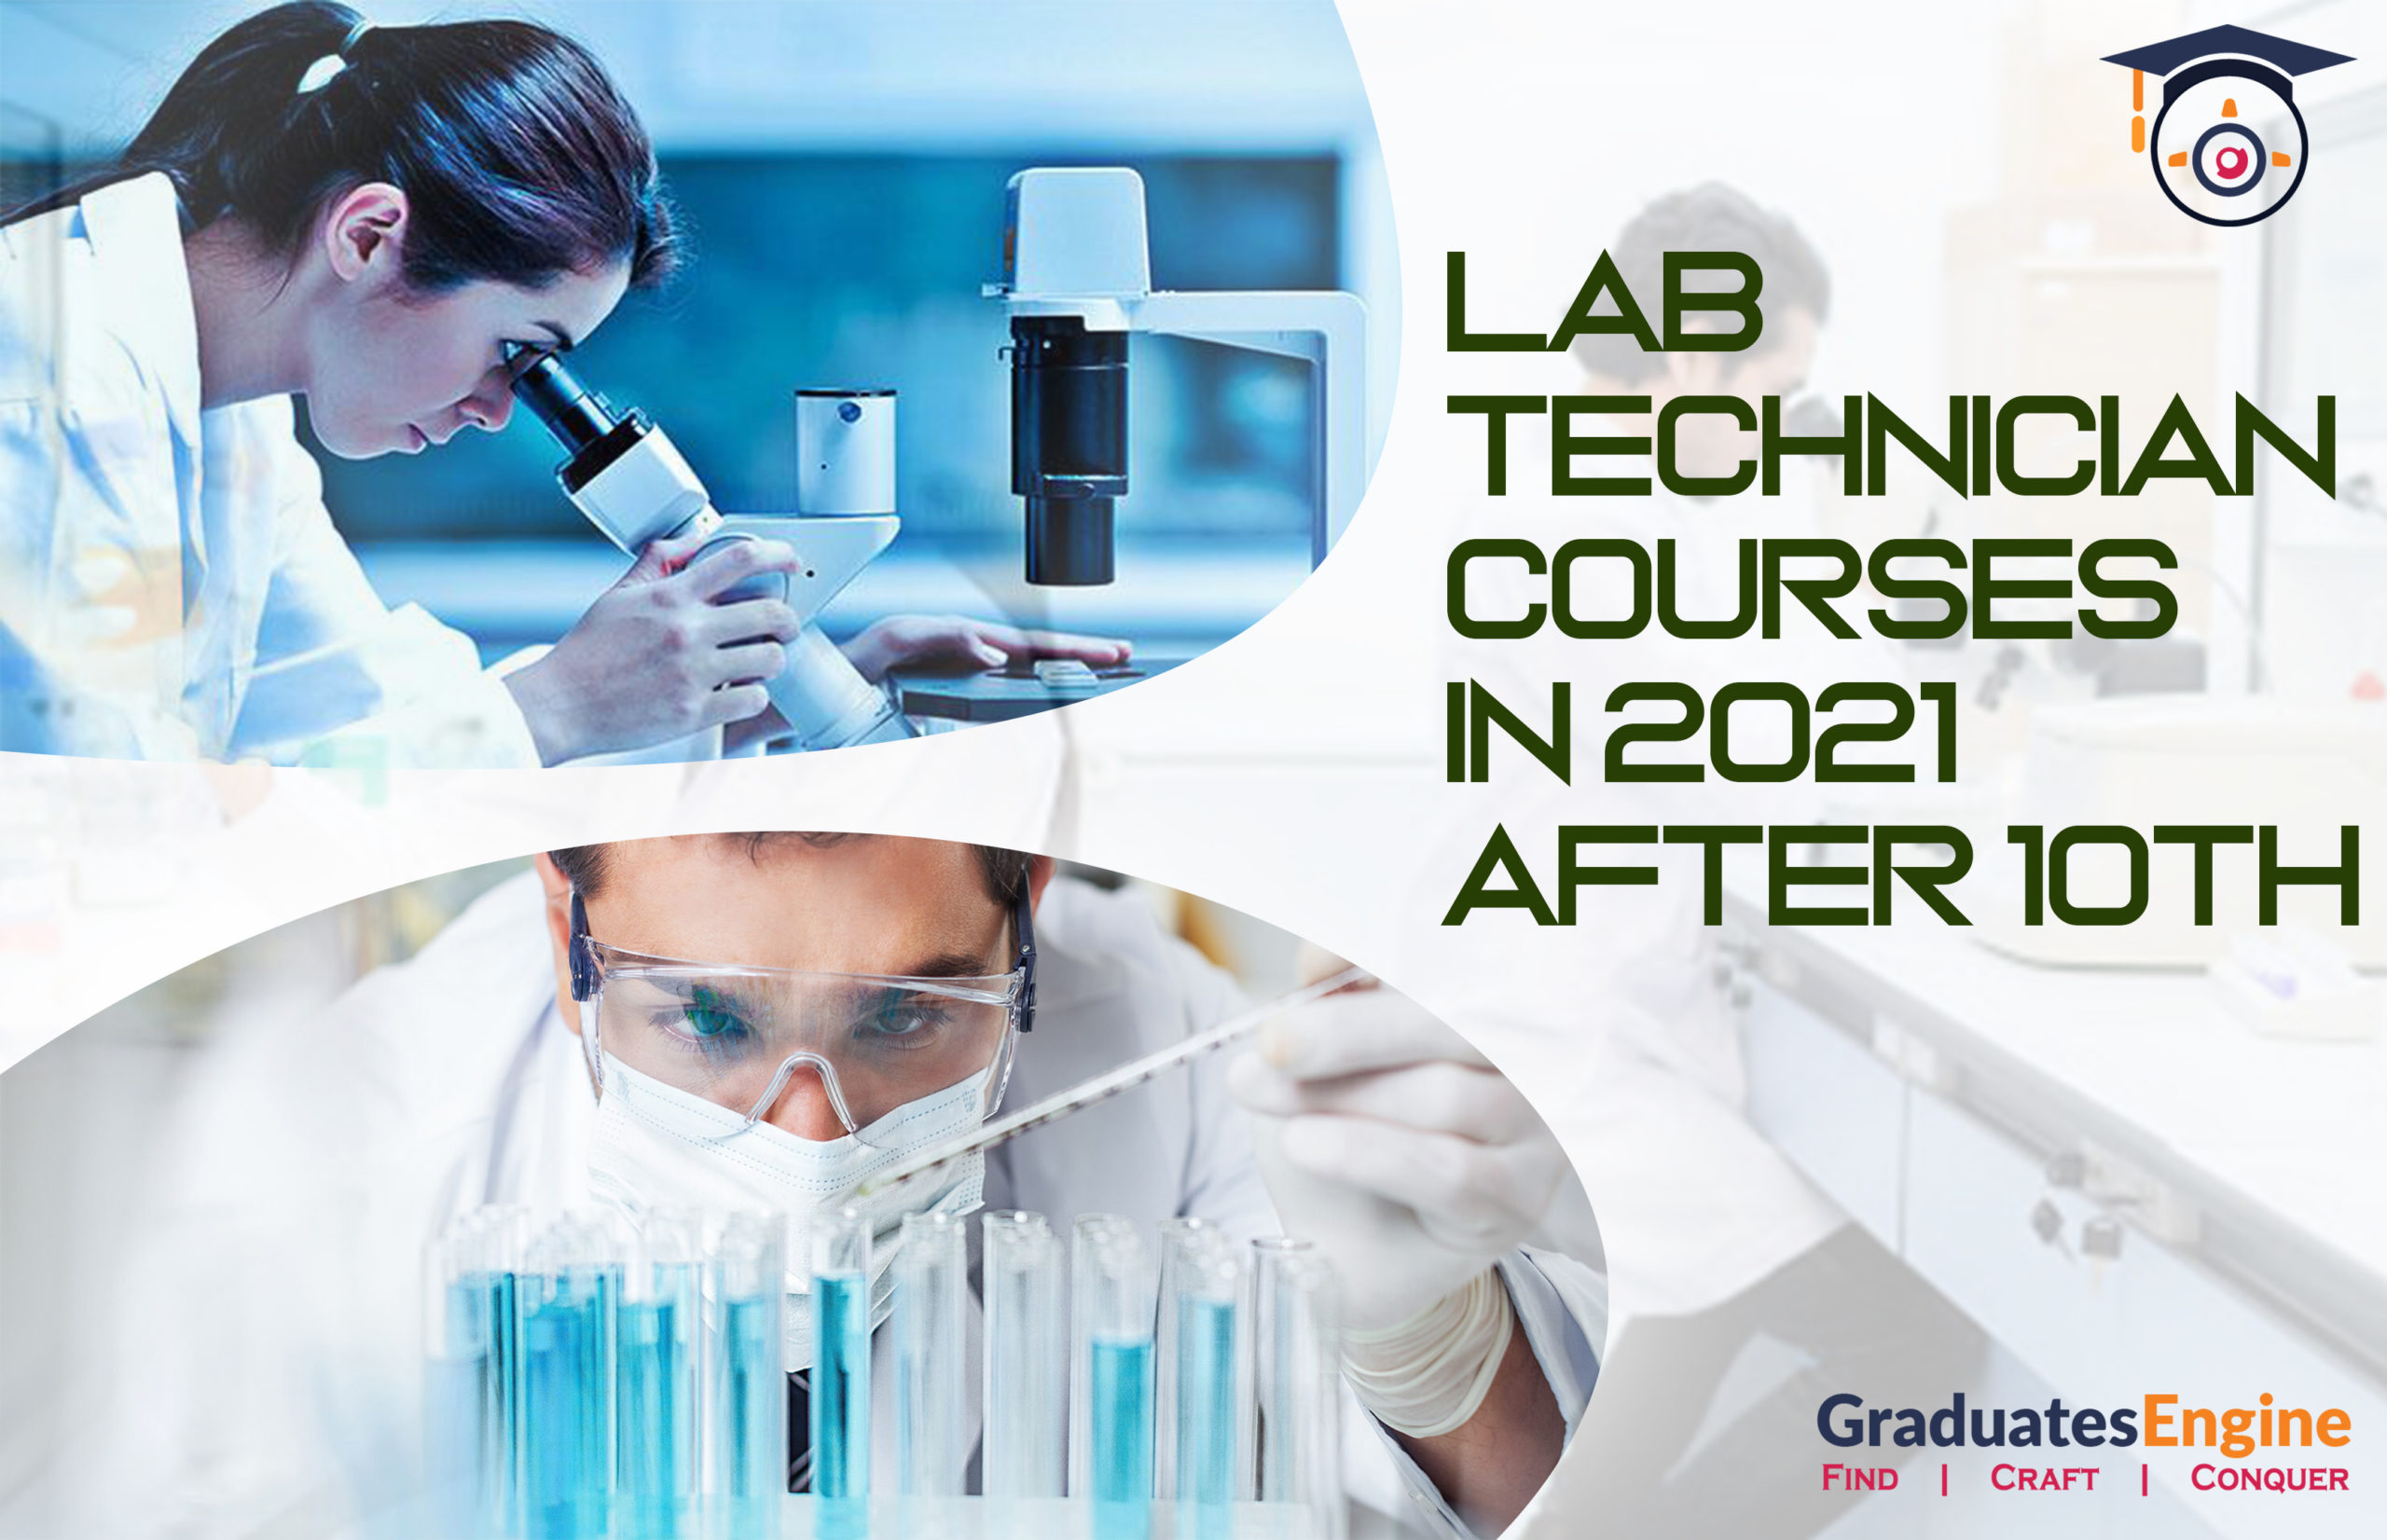 Lab Technician Courses in 2021 After 10th